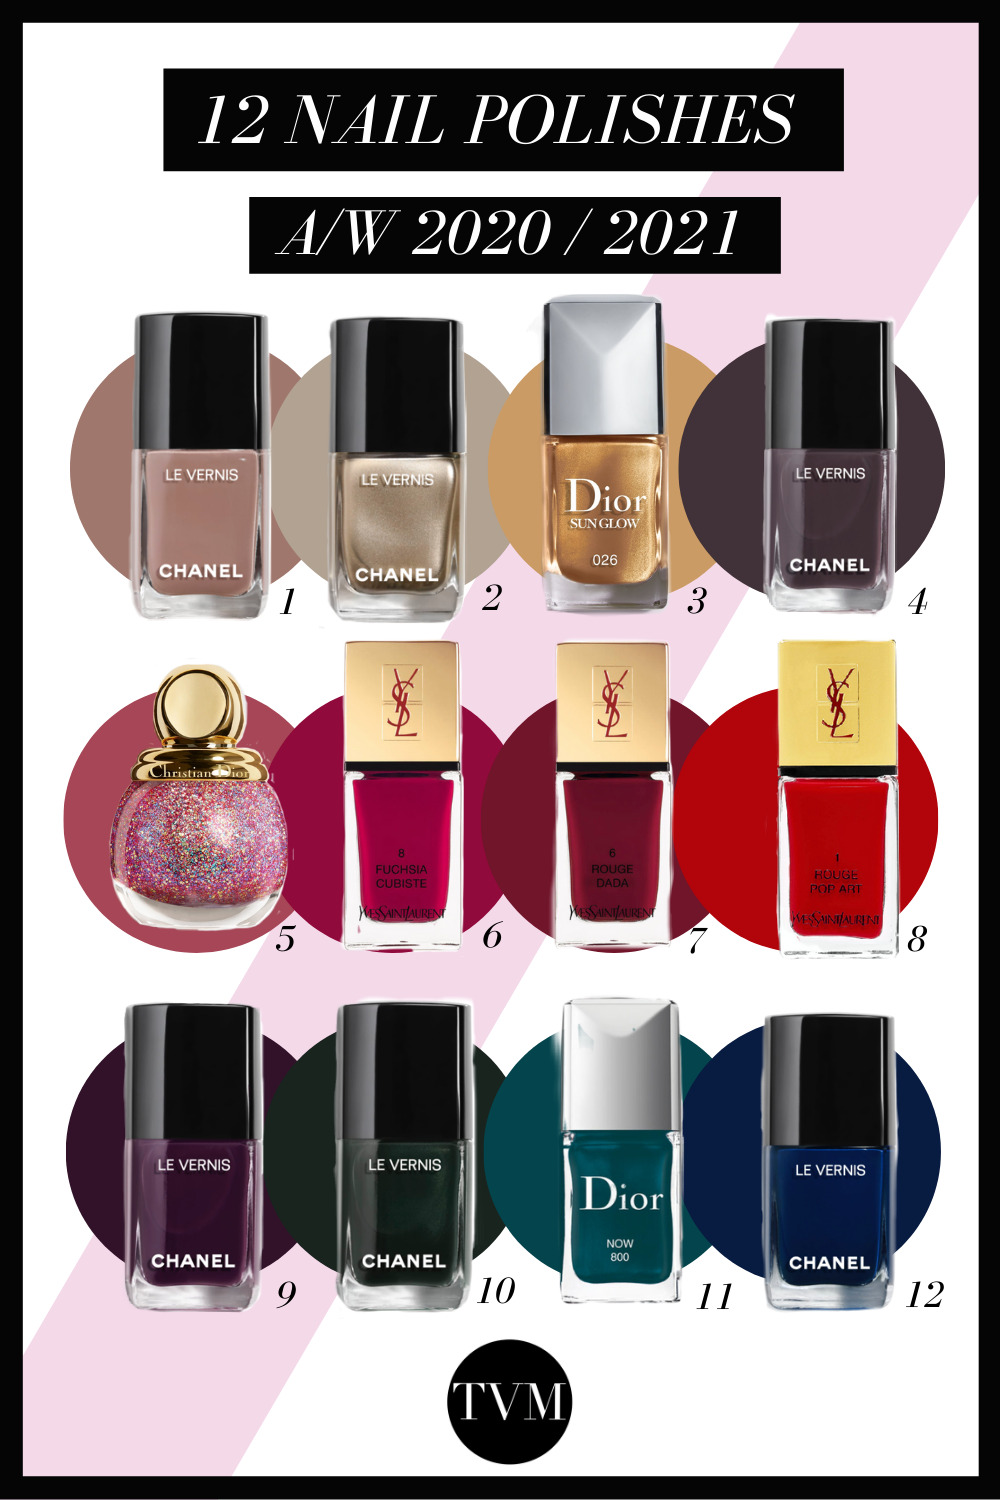 Fall is here! Ready to exchange the pastel spring colours for some fall ones? Here you will find the best 12 nail polishes for this A/W 2020!